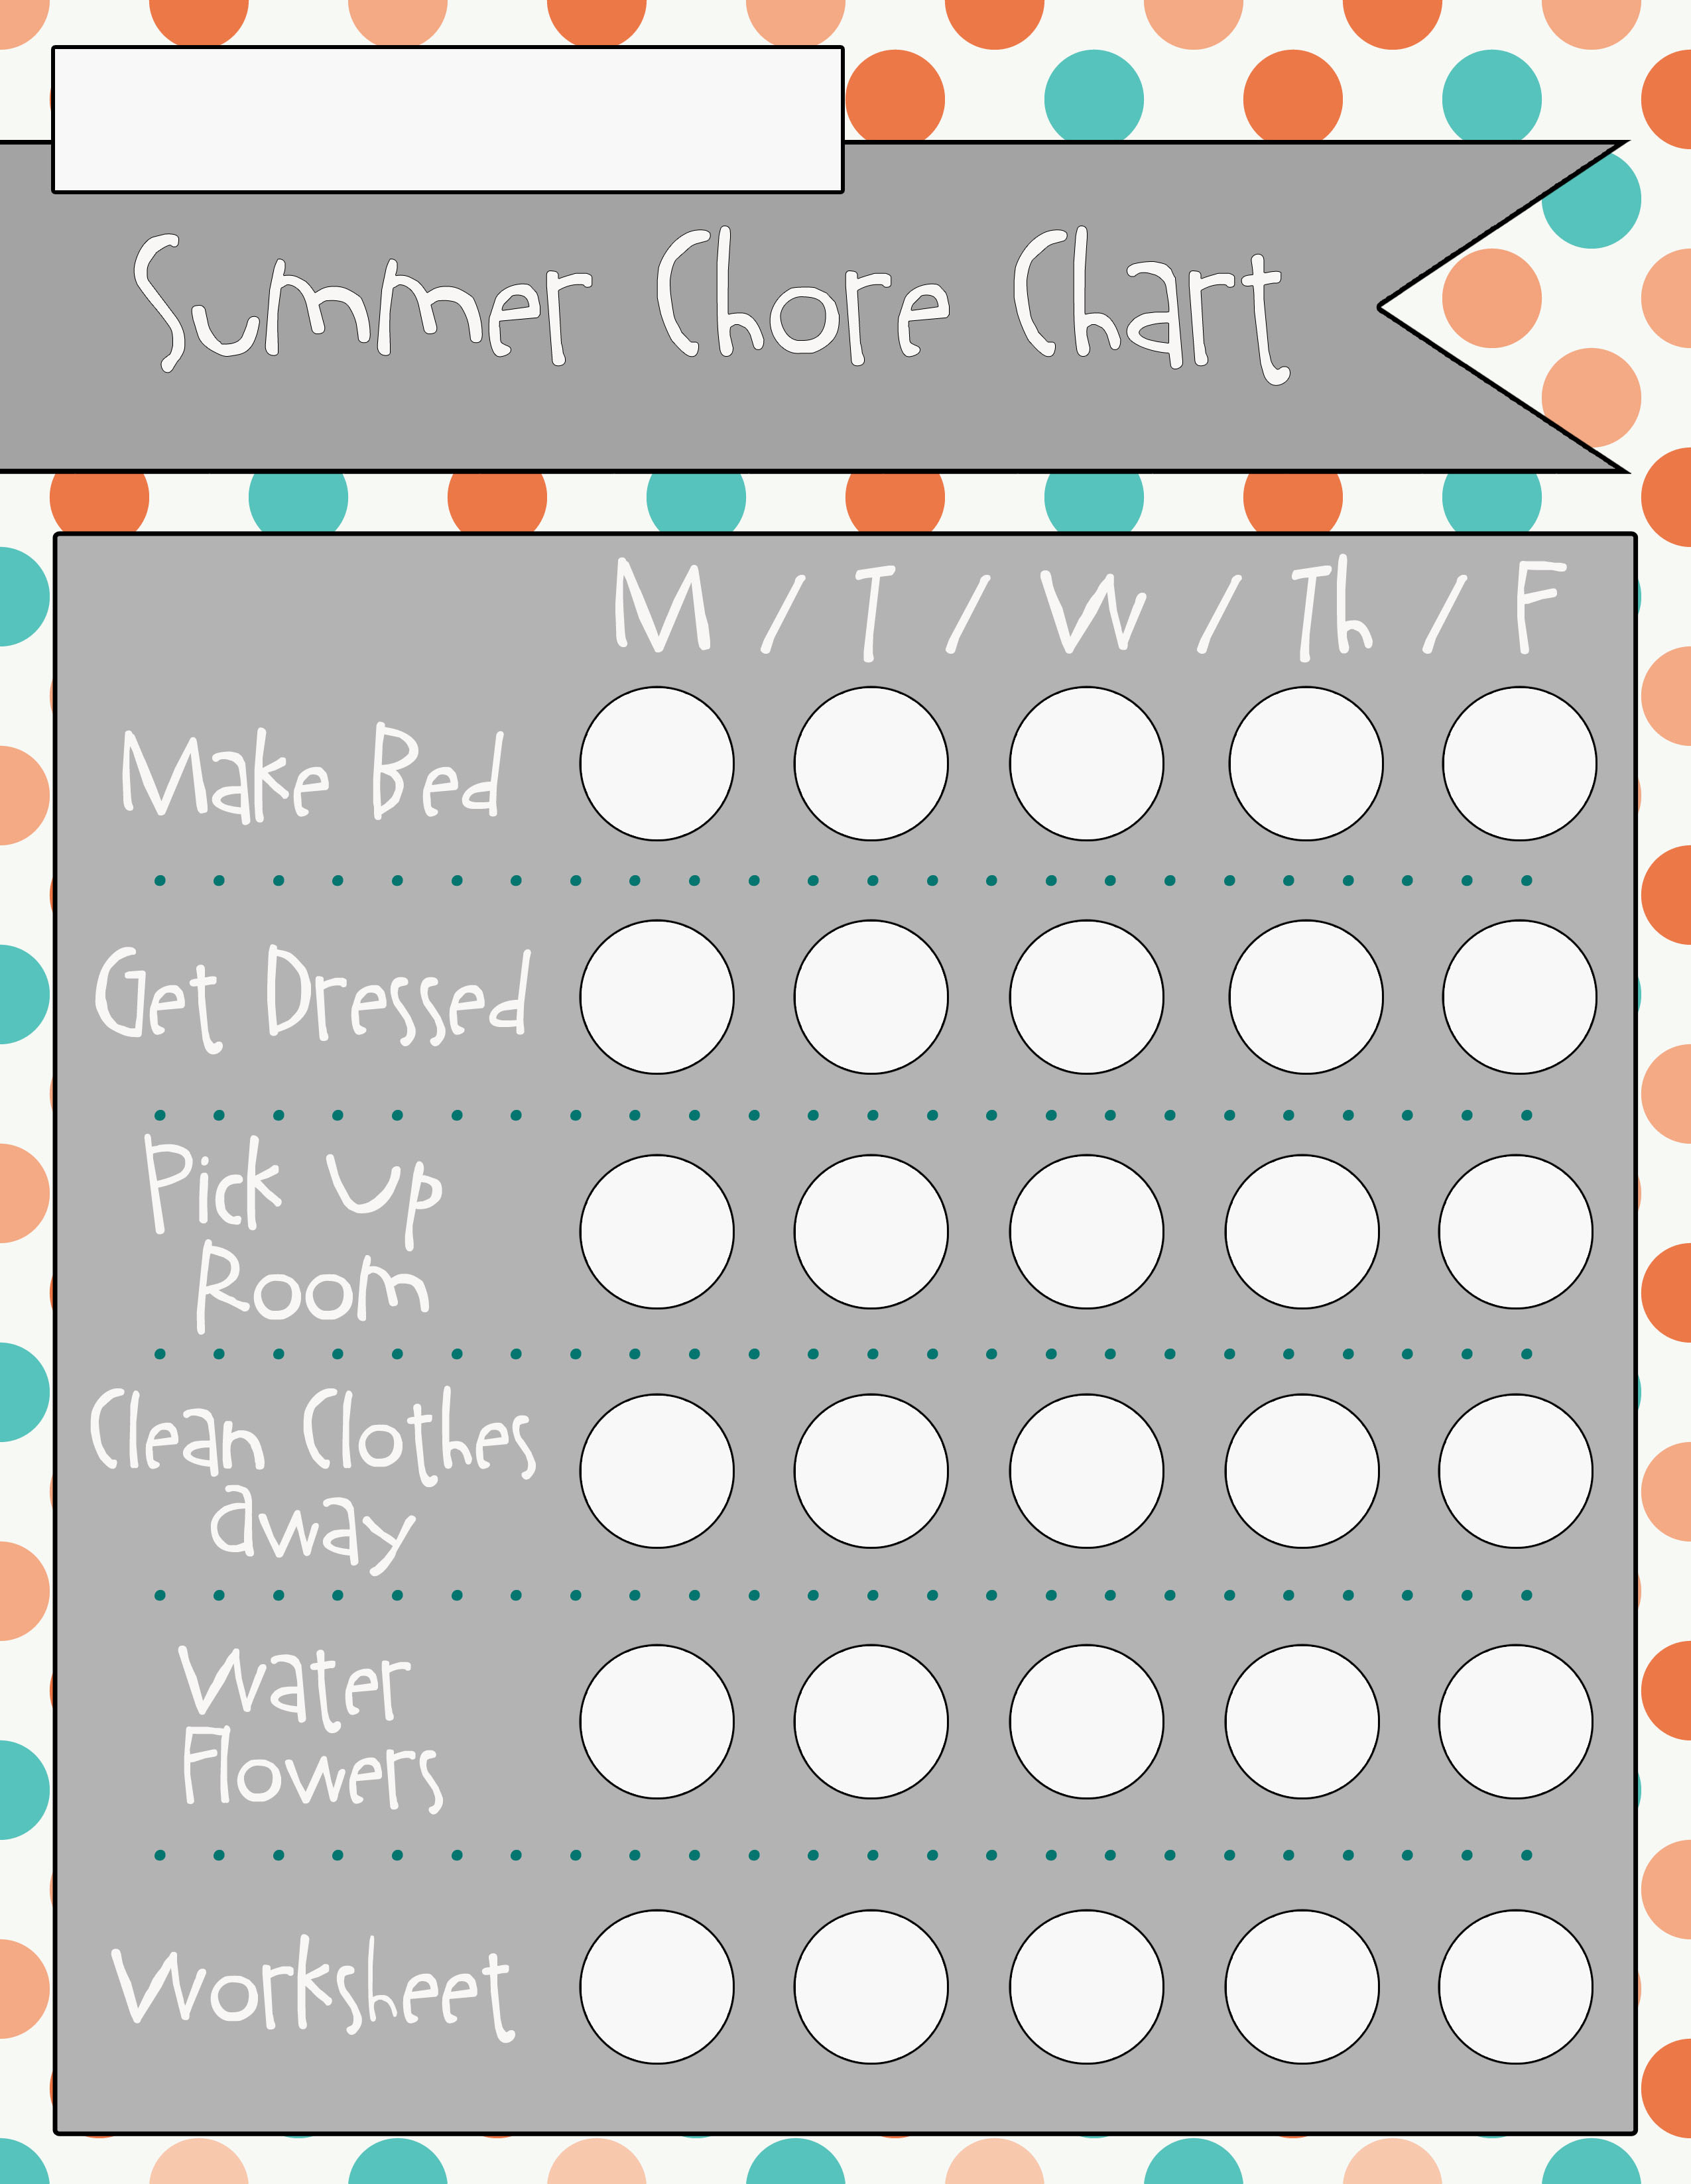 Fun Chore Charts For Family